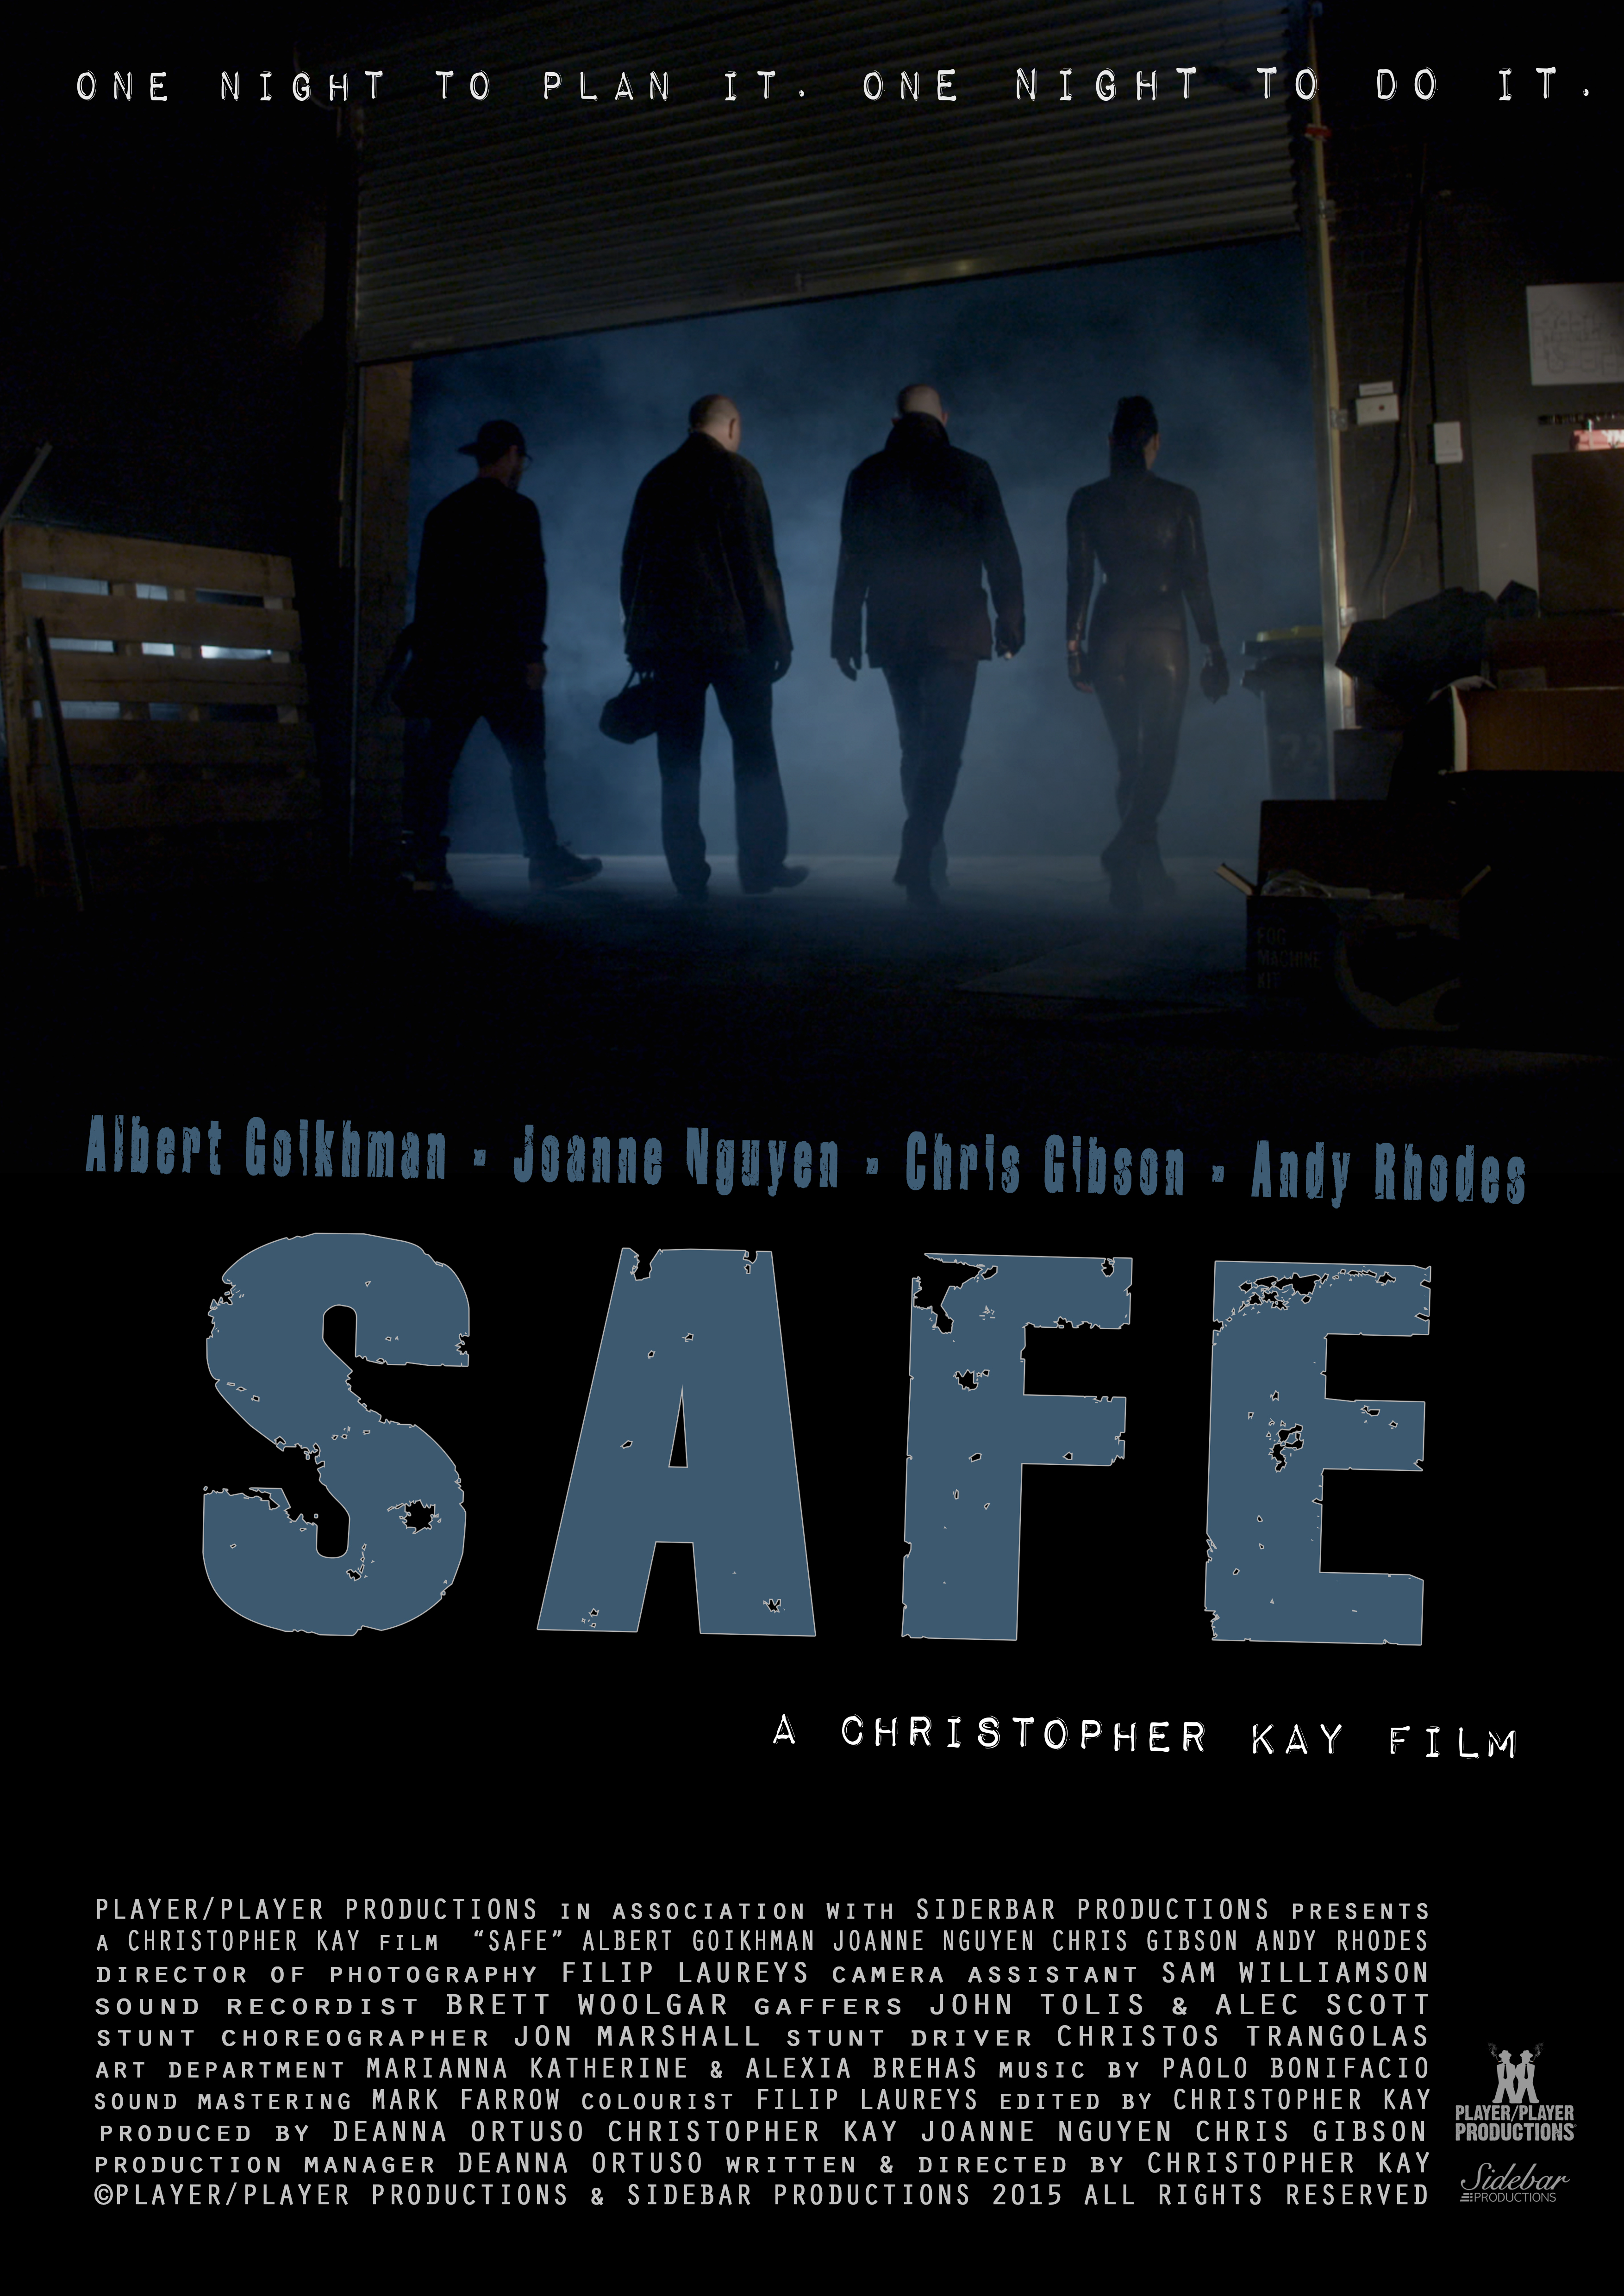 SAFE - scheduled for release January 2016